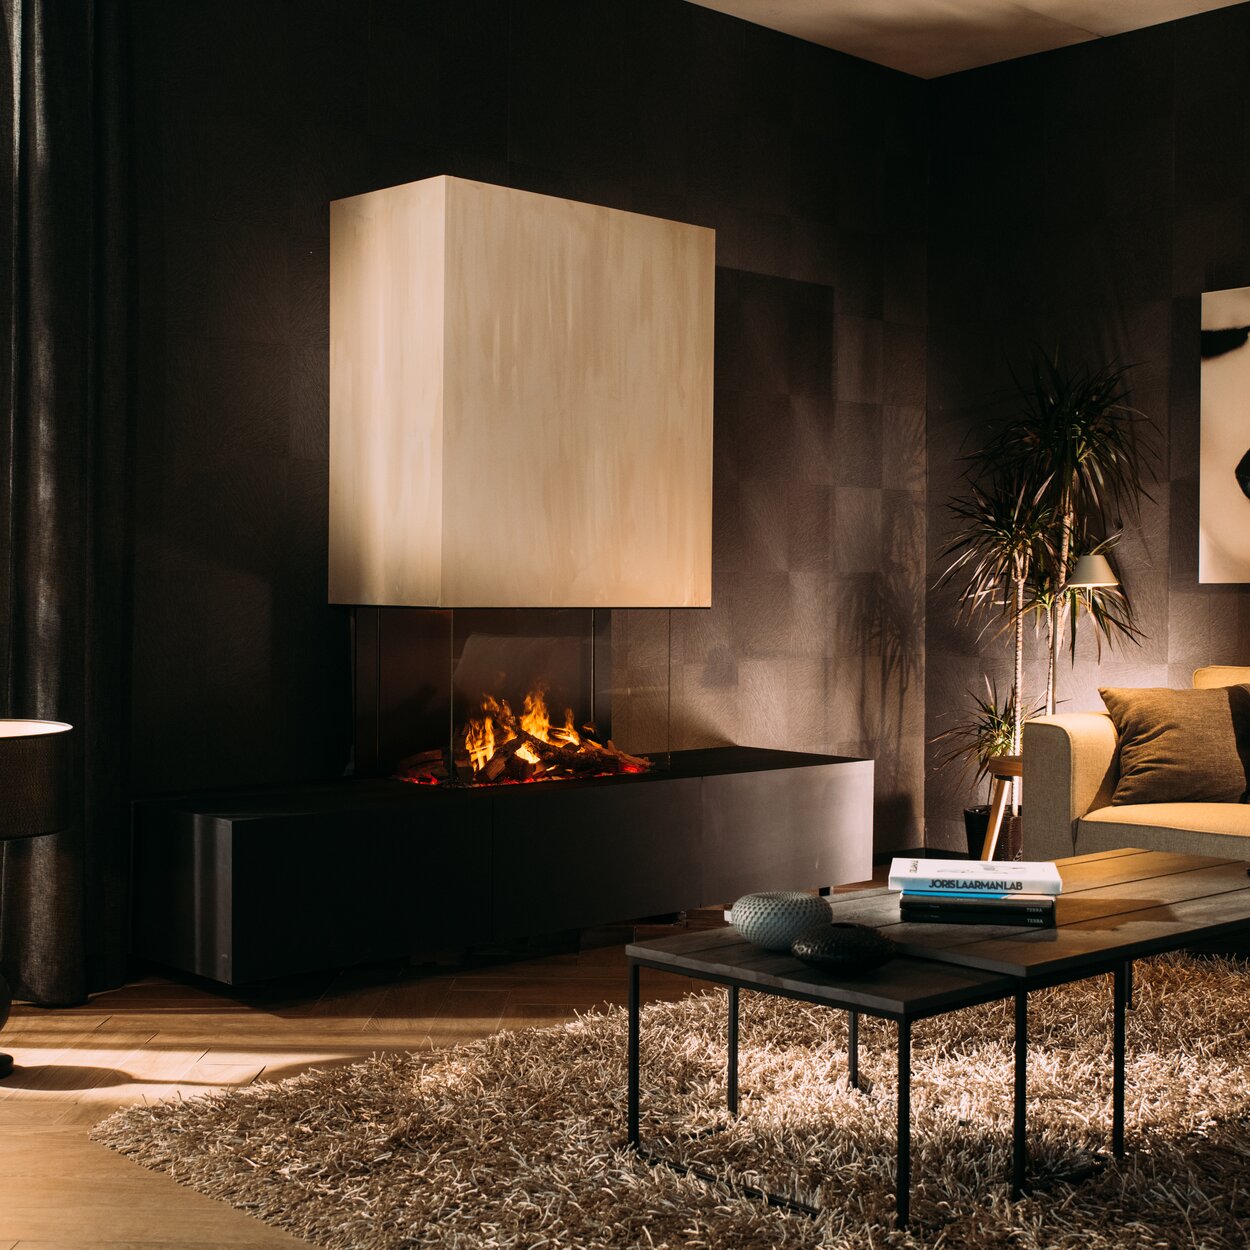 eMatriX Mood 800/500 electric fireplace, glazed on 3 sides, in an elegant living room with dark walls and light-coloured furniture.